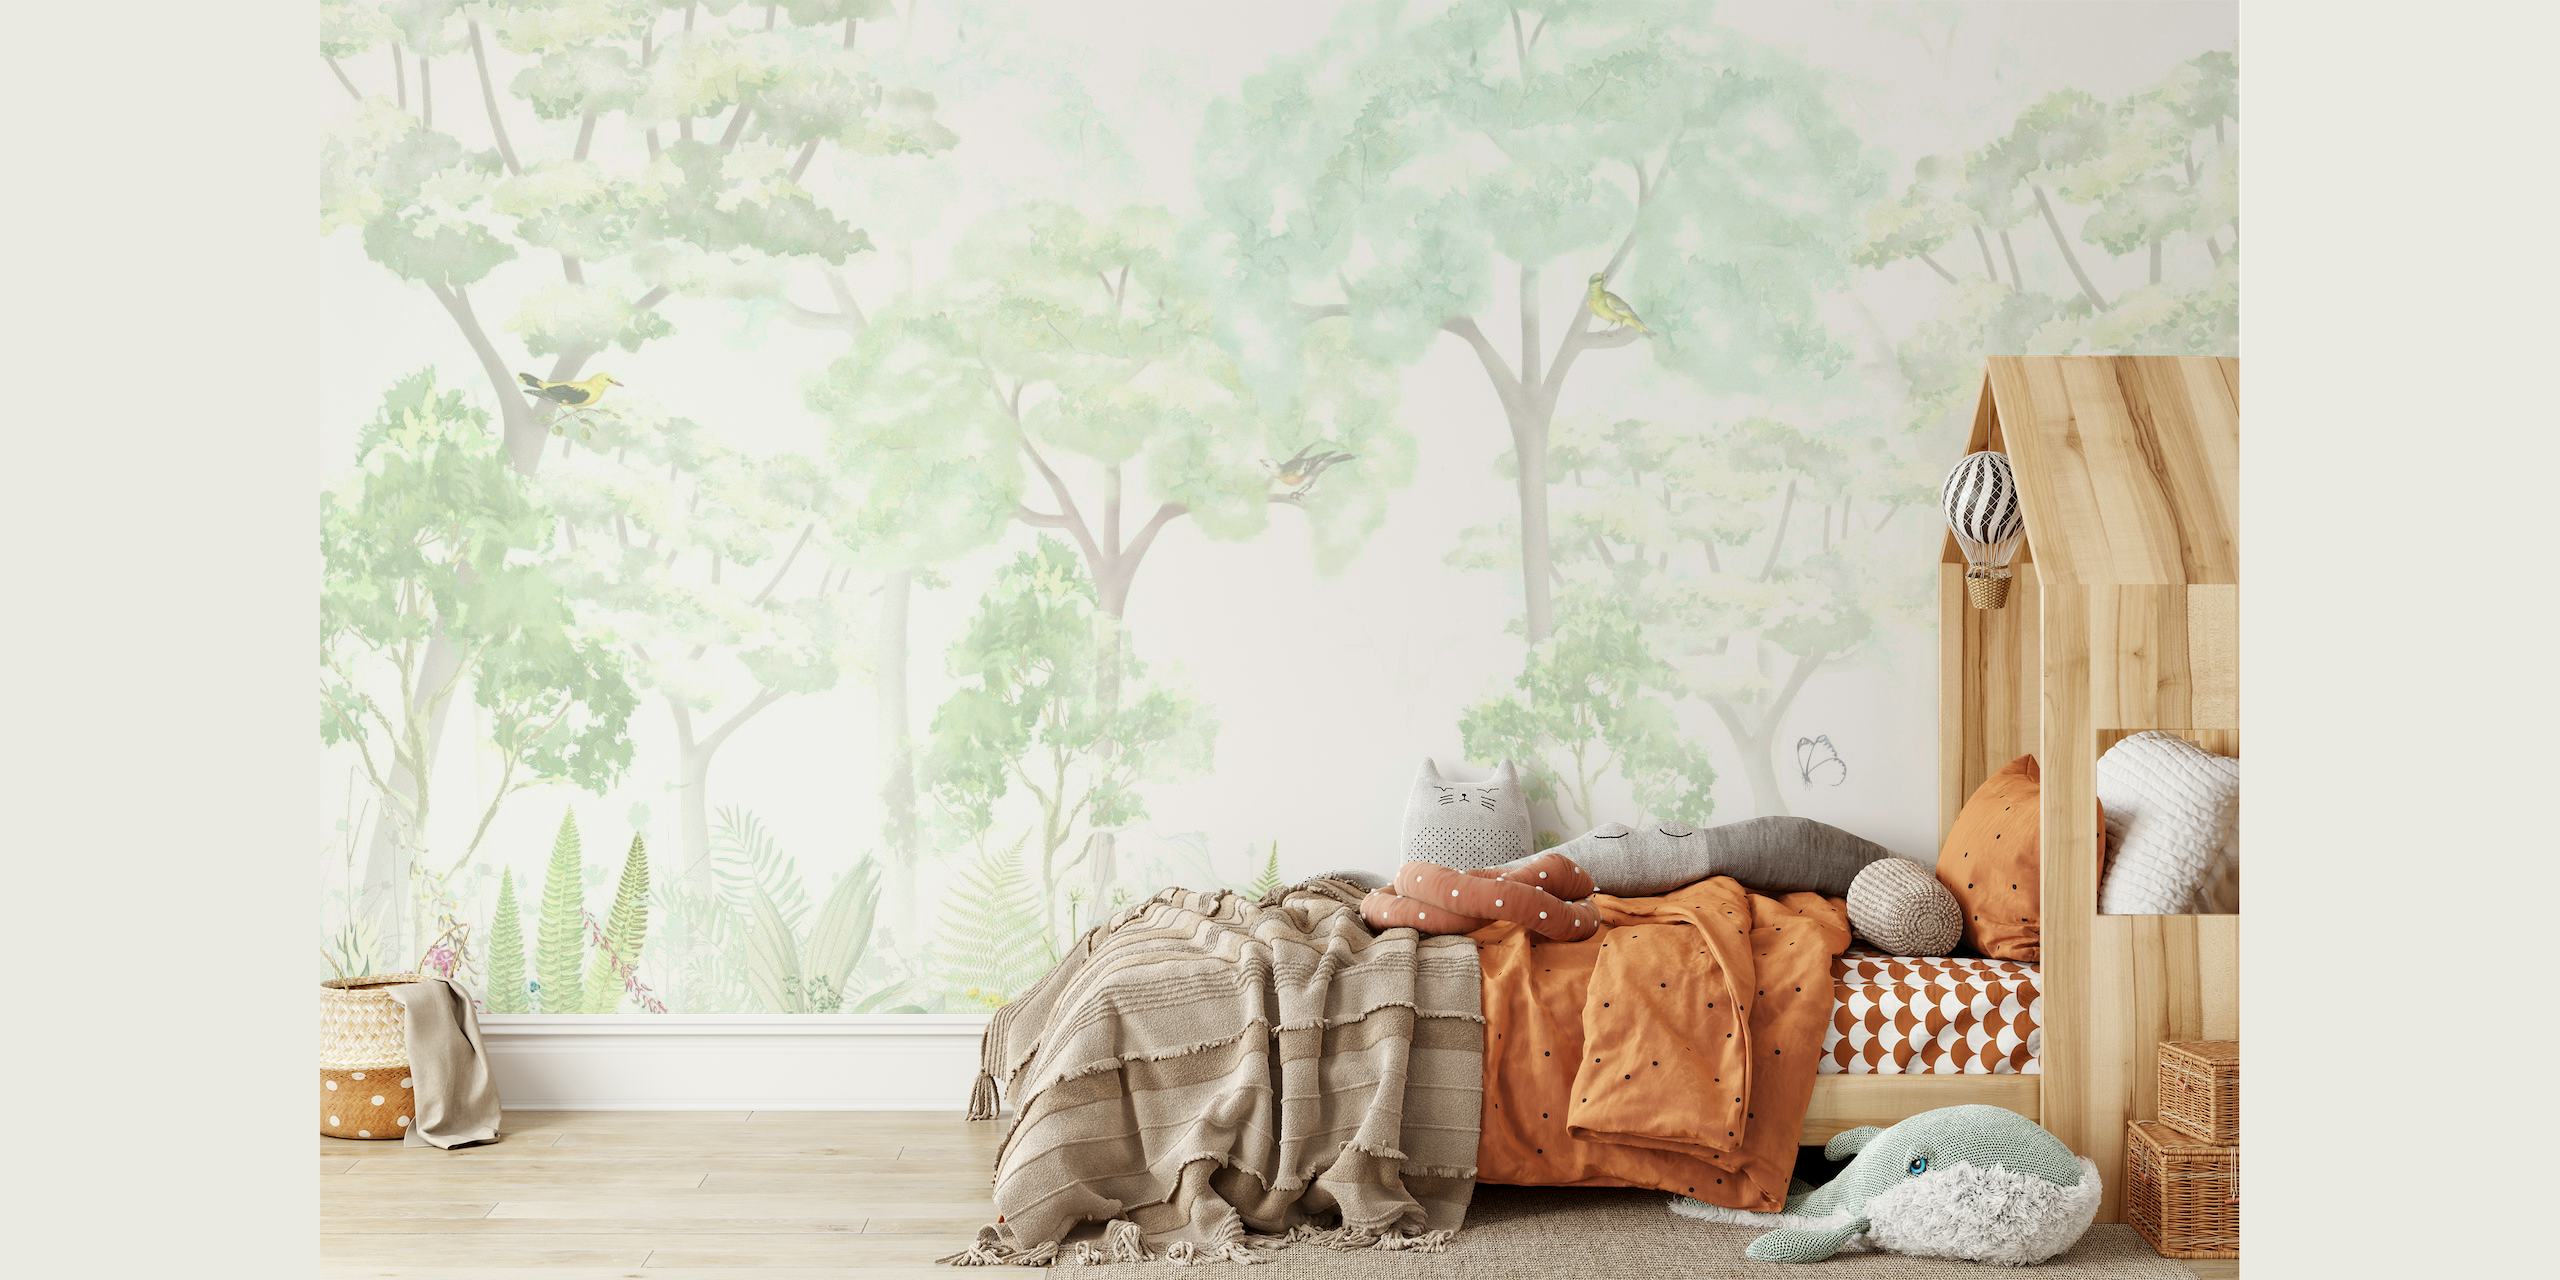 Whimsical fantasy forest wall mural with soft green tones and ethereal trees